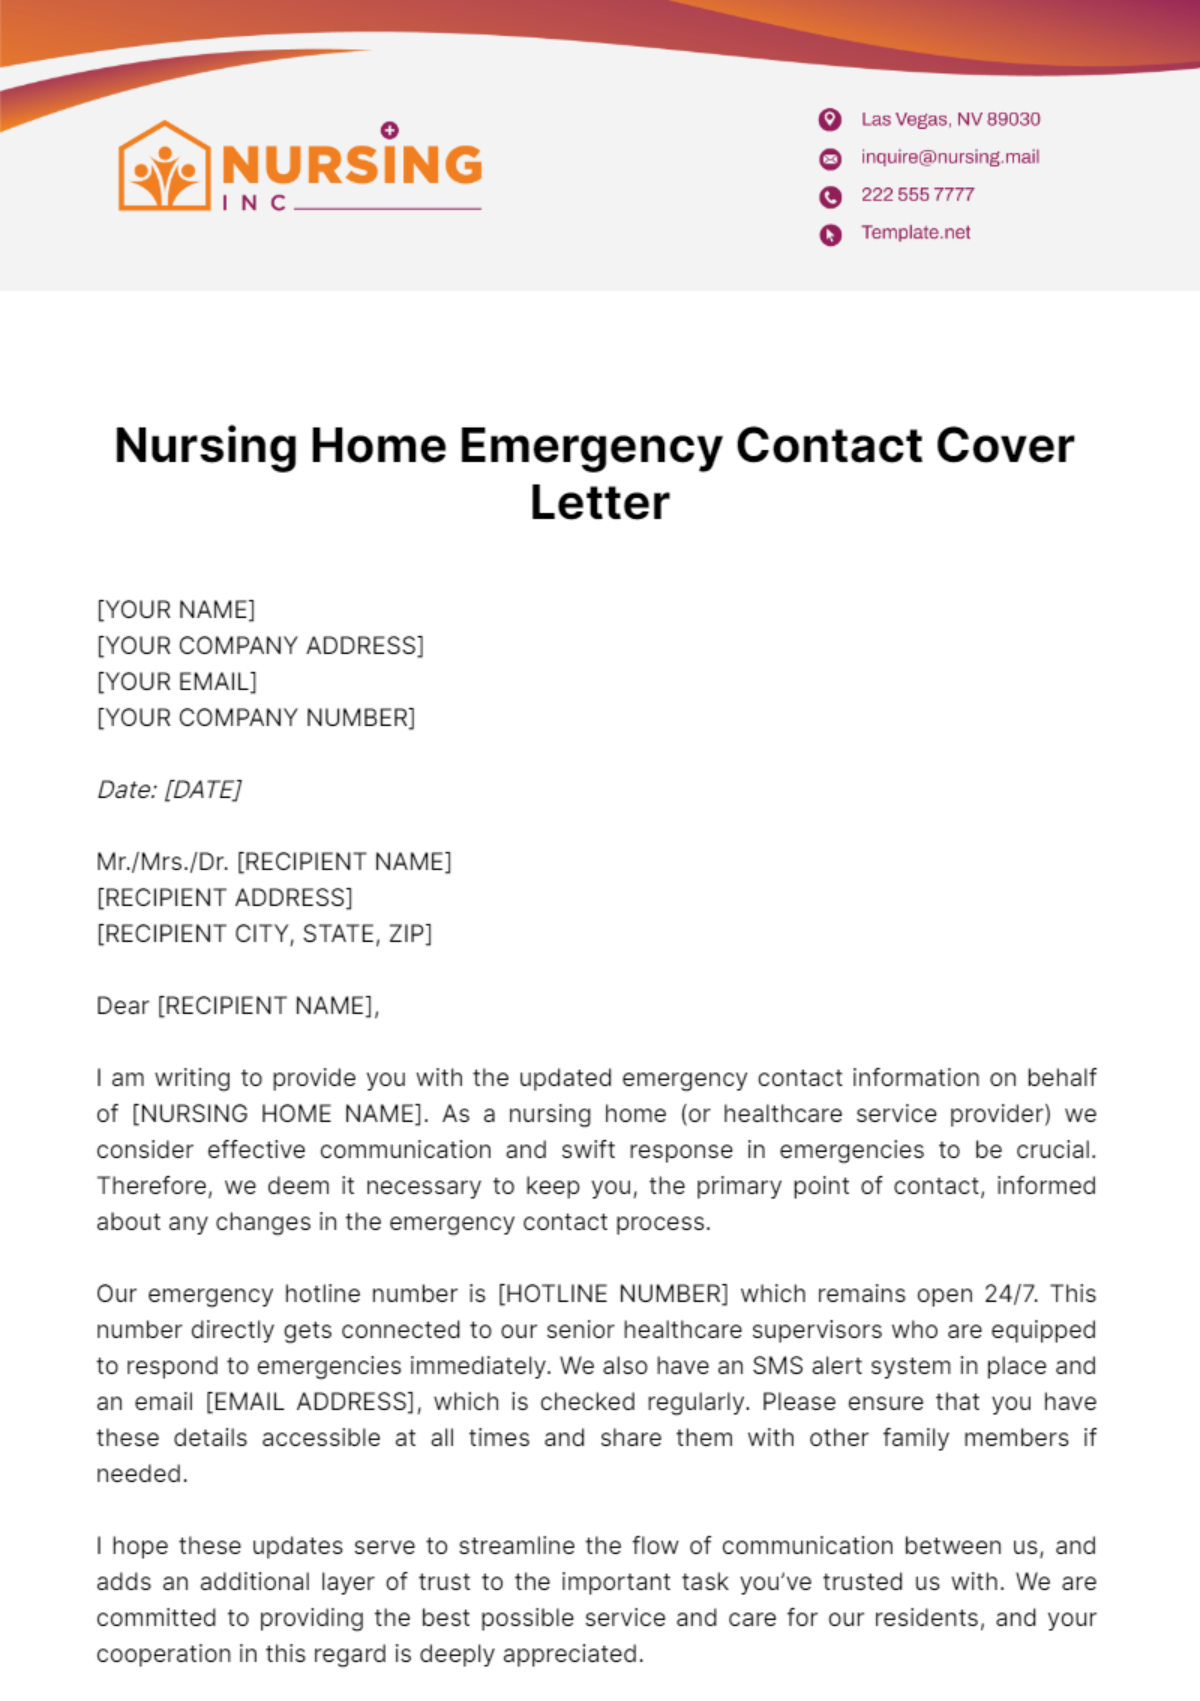 Nursing Home Emergency Contact Cover Letter Template Edit Online